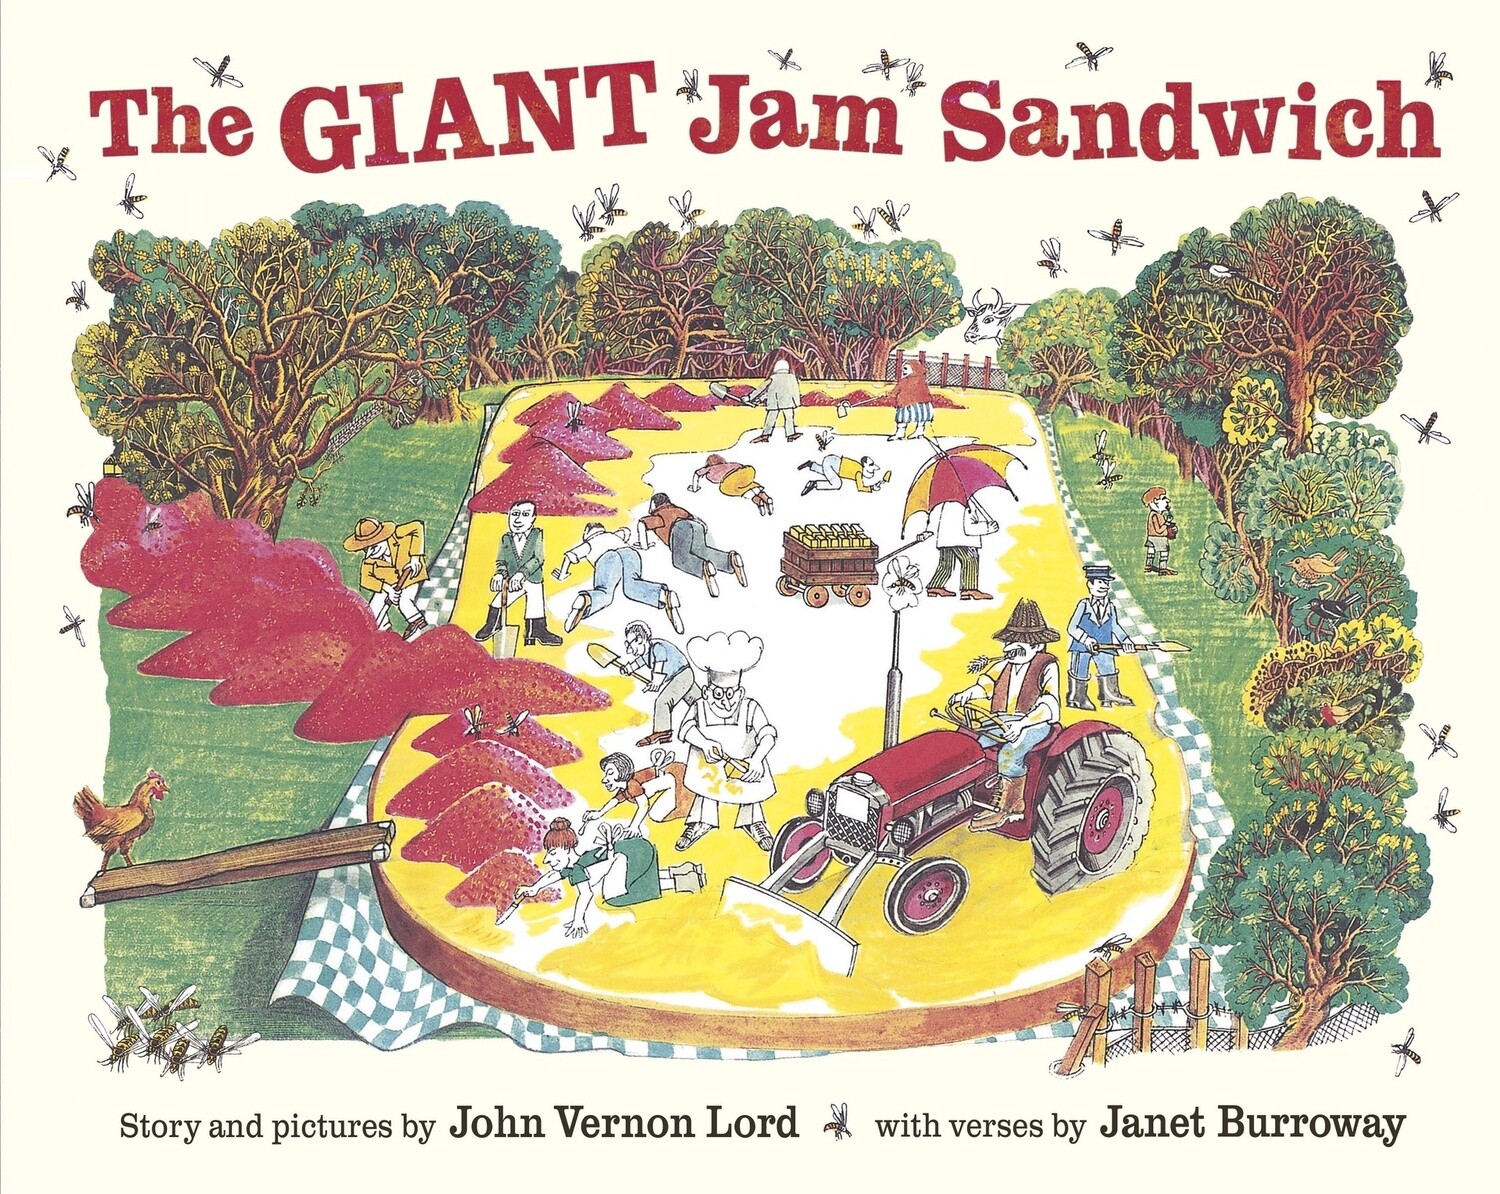 The Giant Jam Sandwich by Janet Burroway and John Vernon Lord